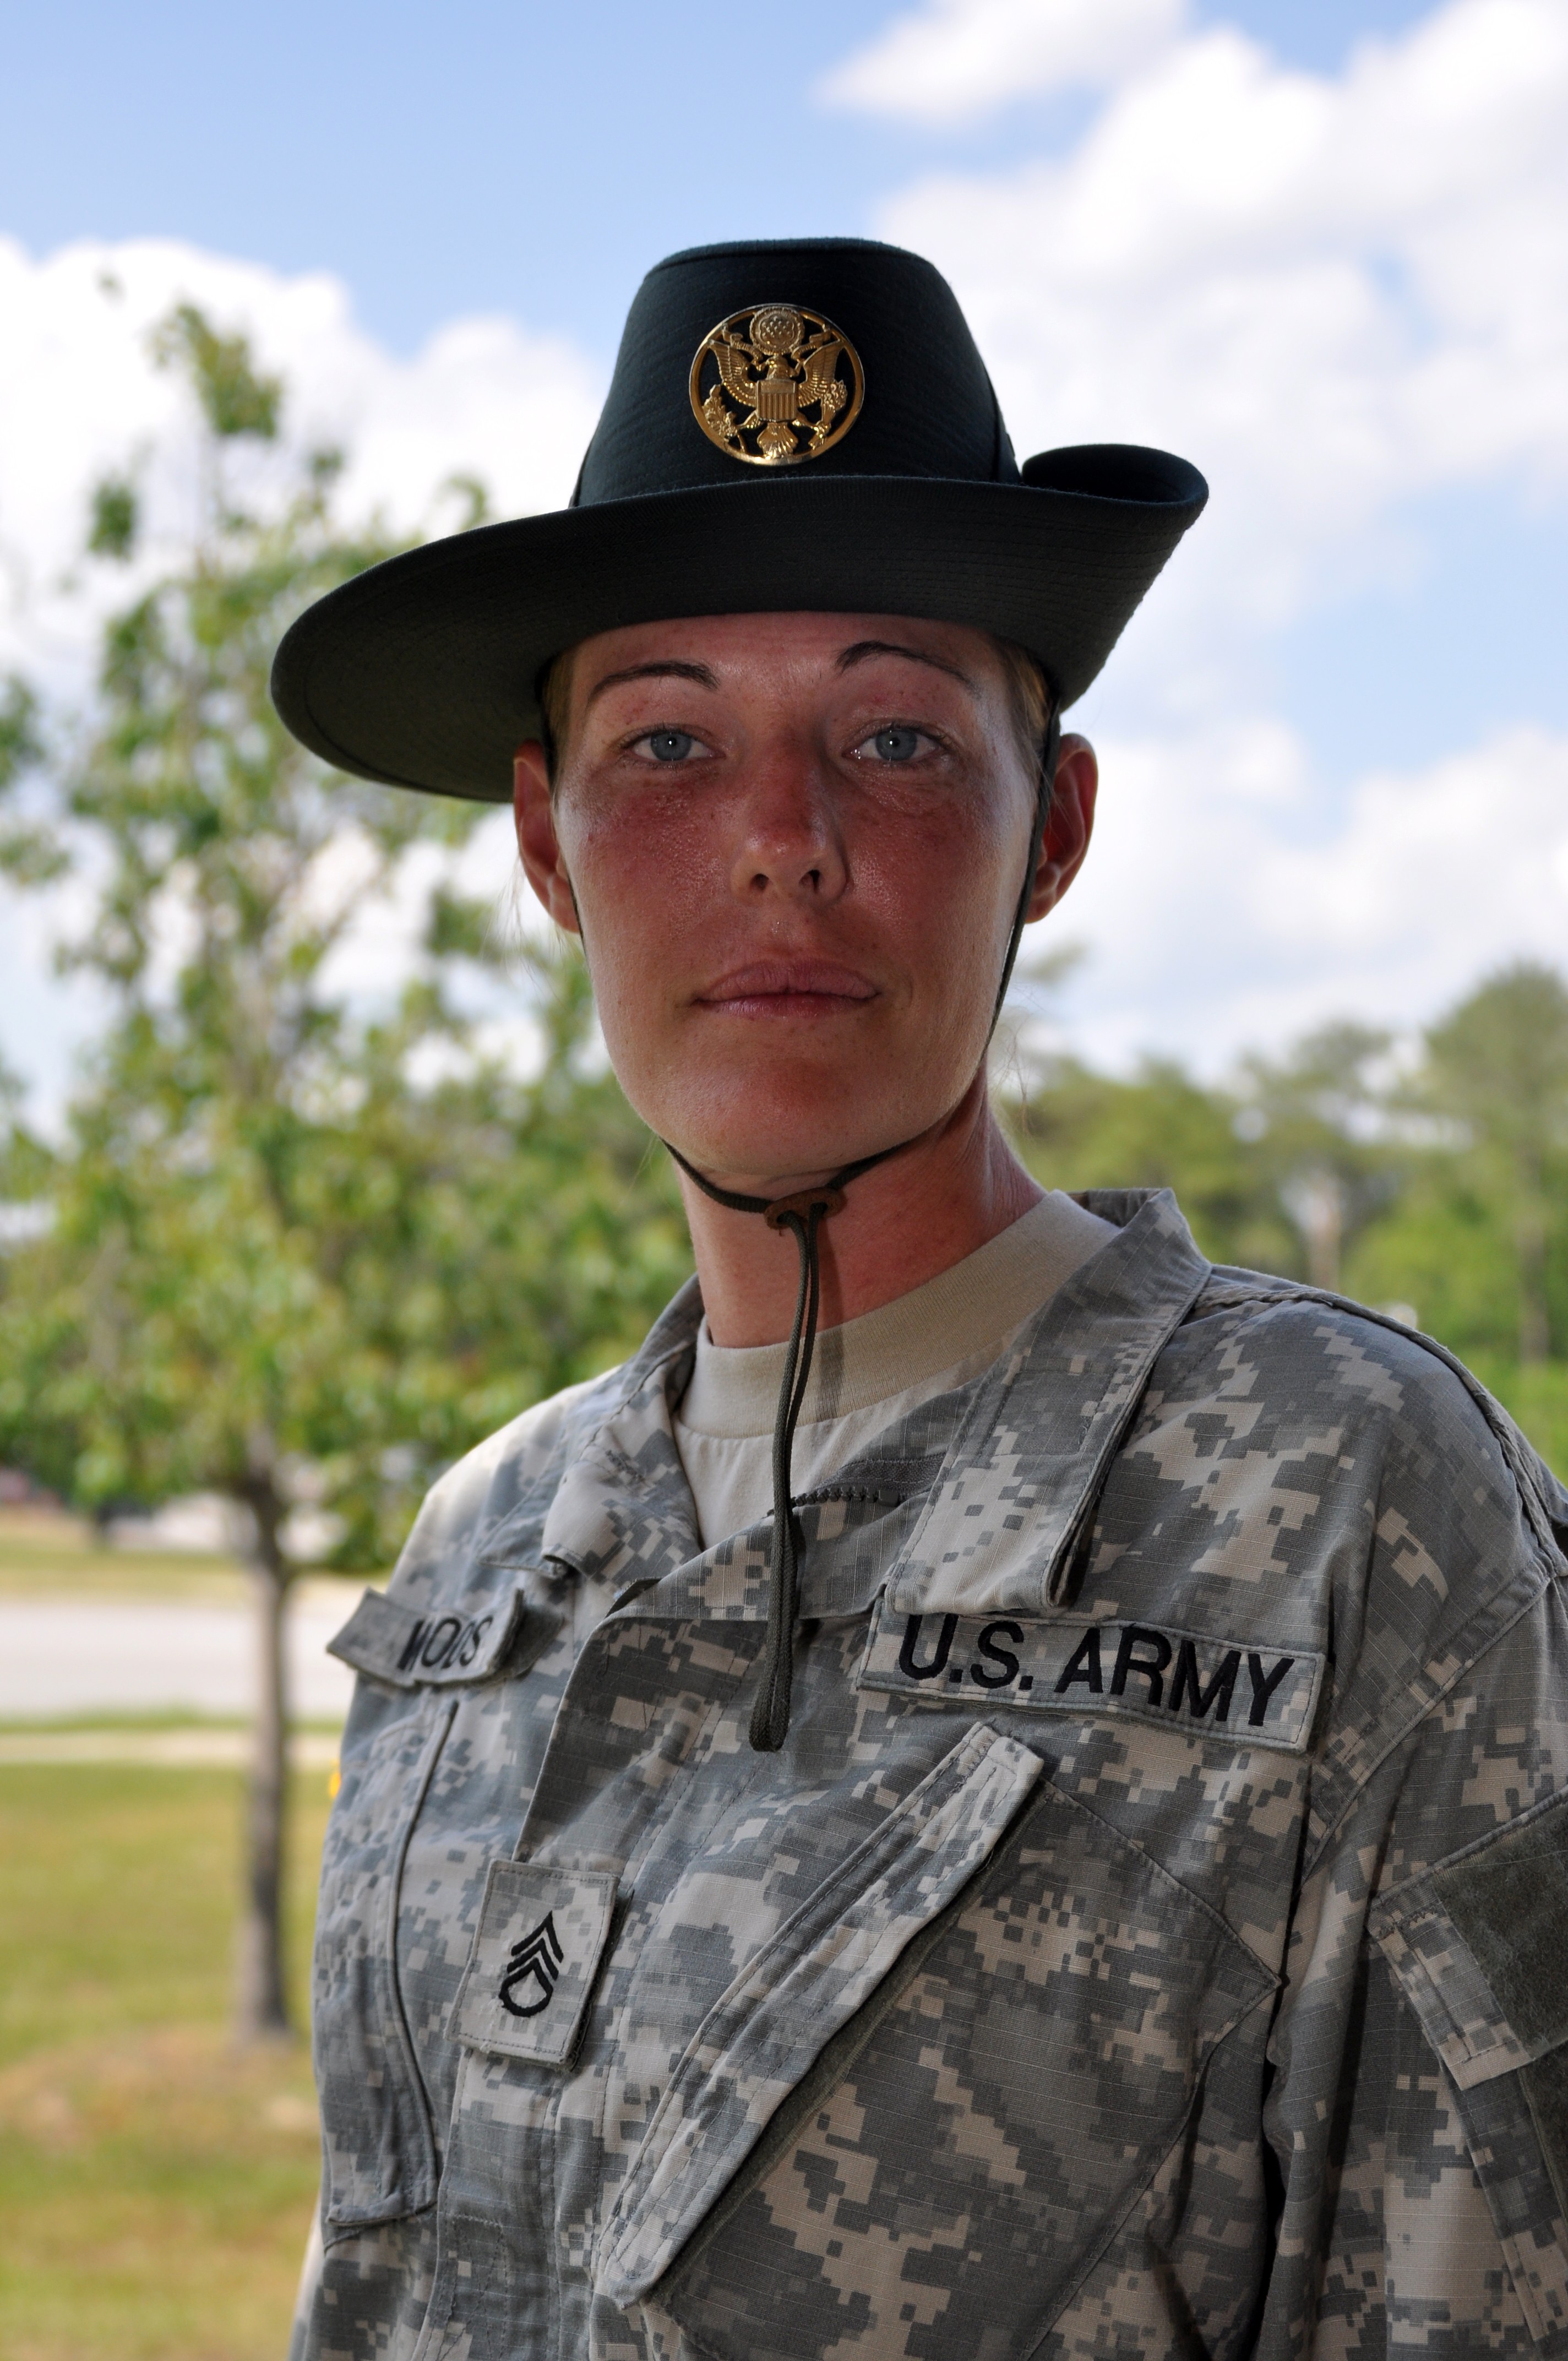 Mechanic-turned-drill sergeant excels | Article | The United States Army